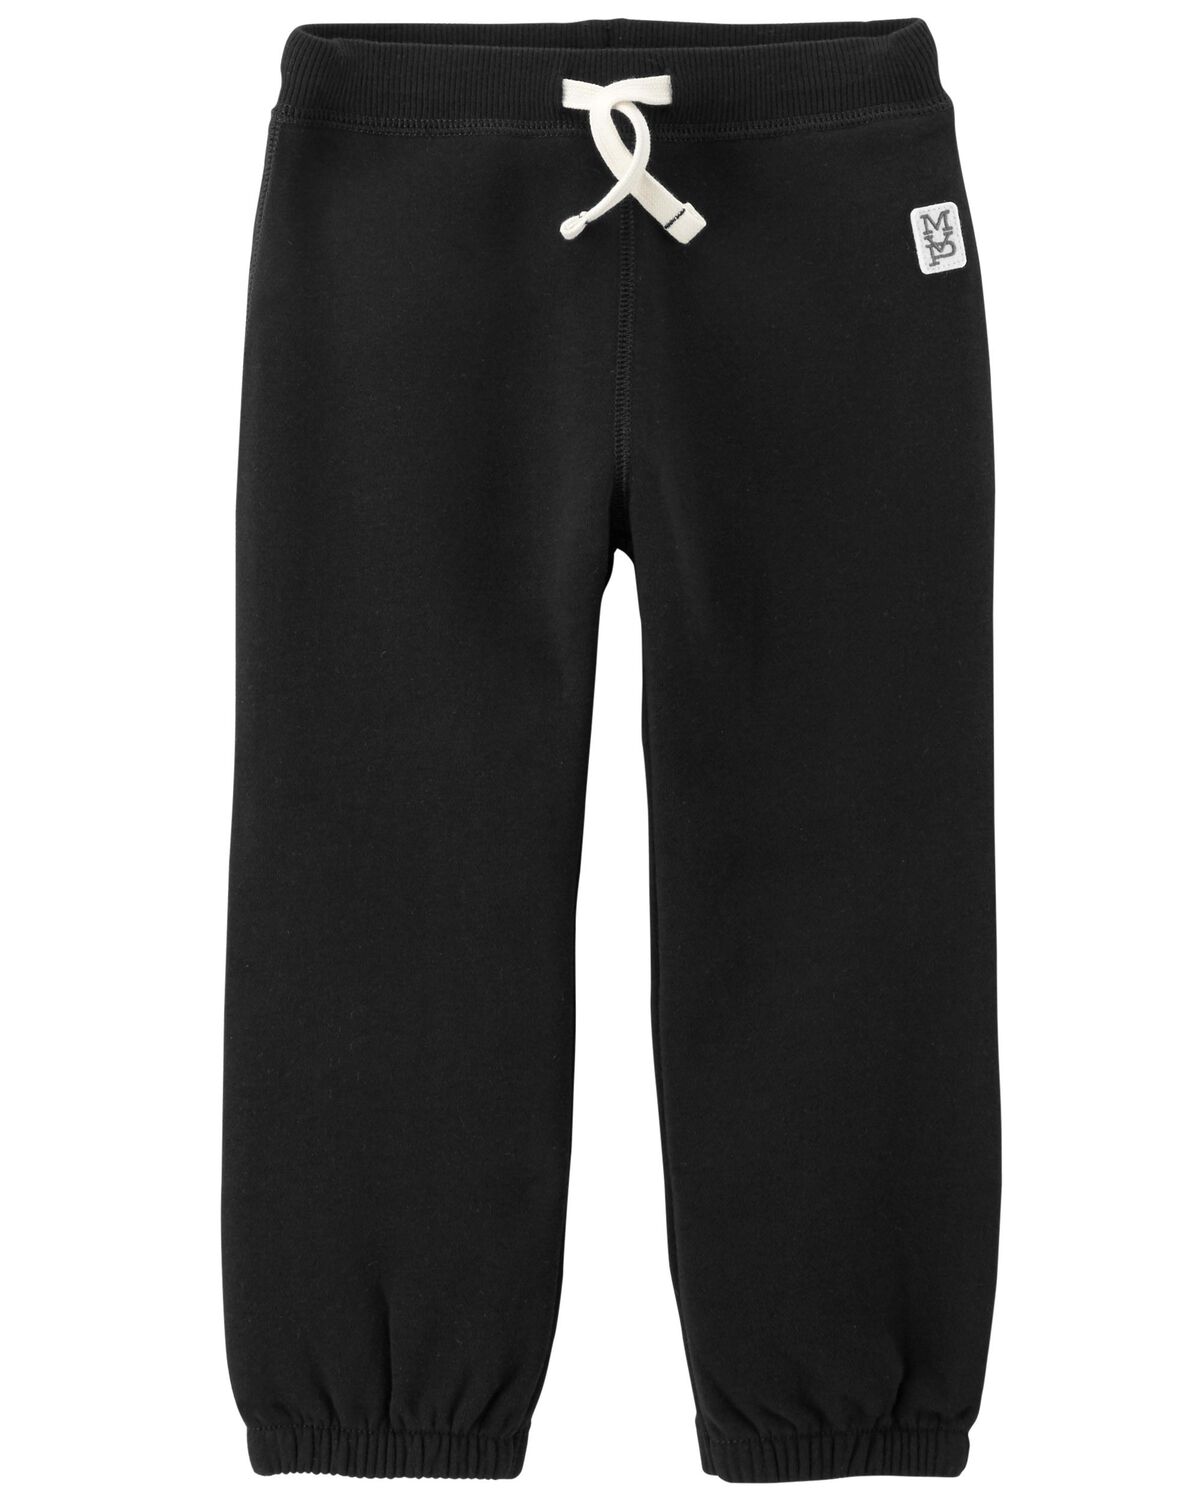 Black Pull-On Joggers | carters.com